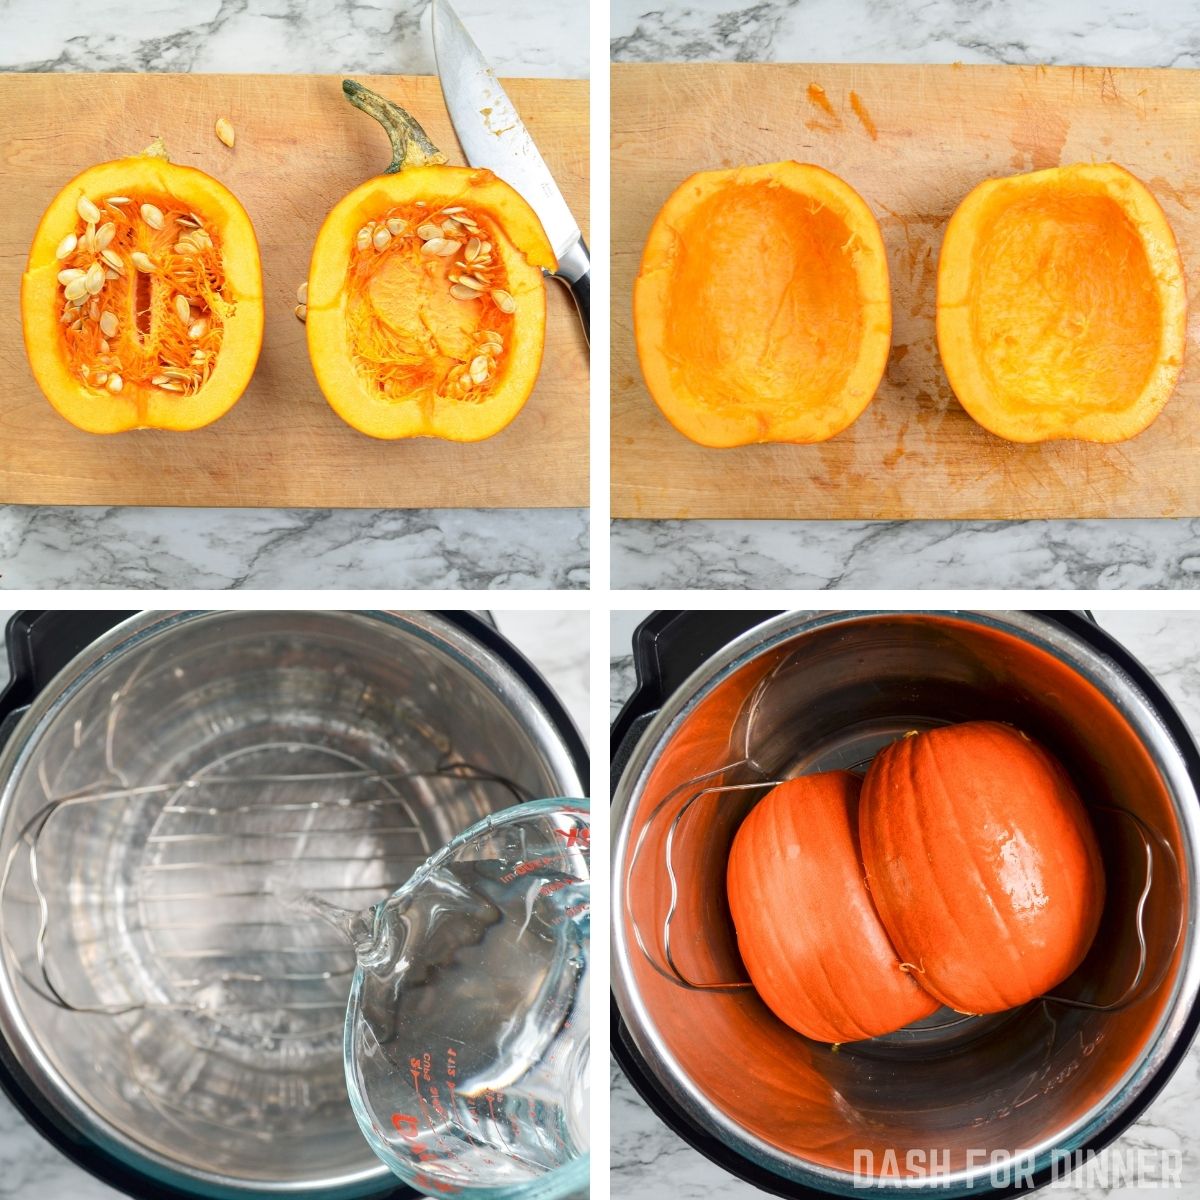 Cutting a pumpkin in half and adding to an Instant Pot.